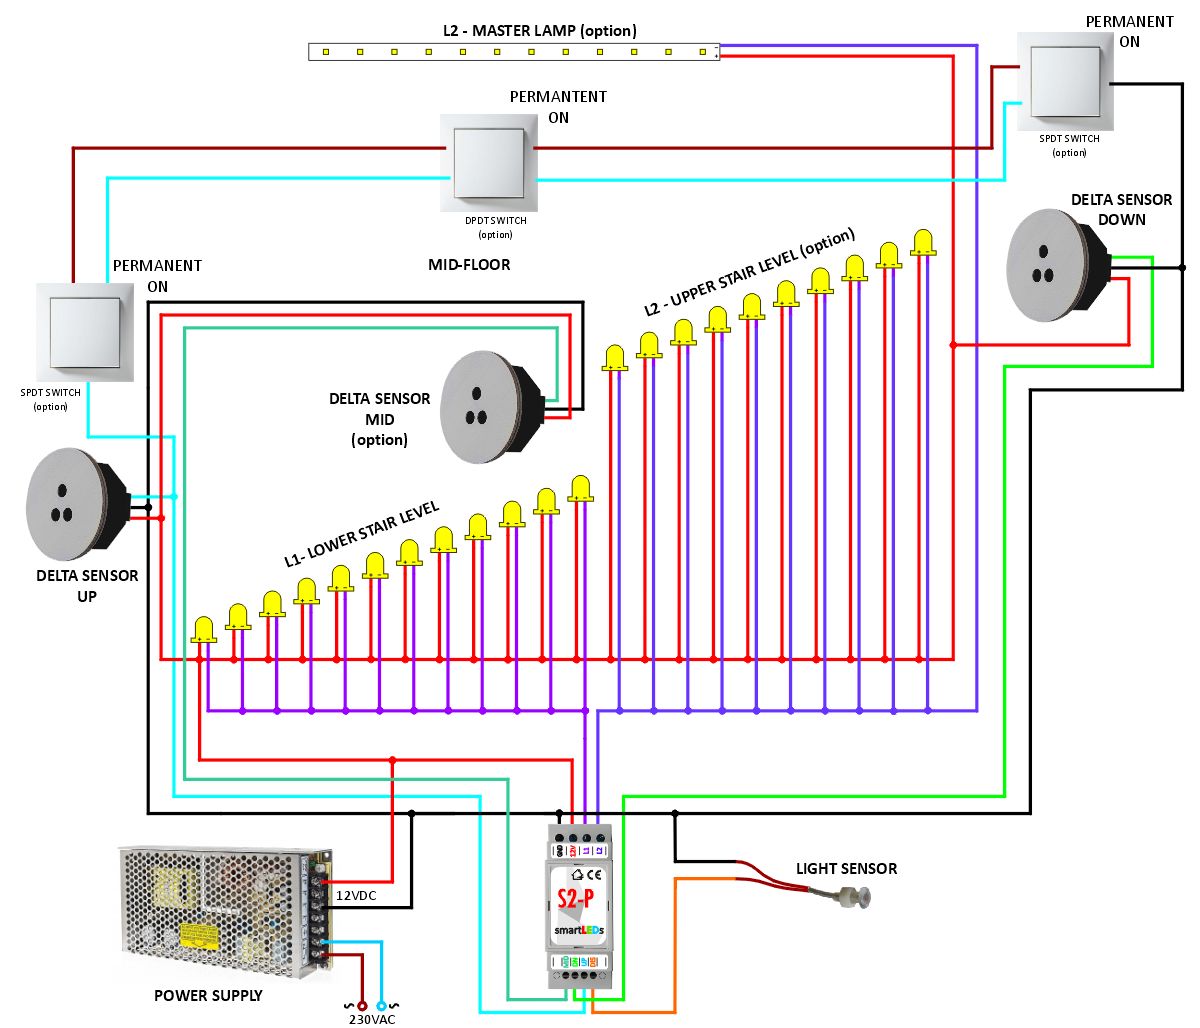 smartLEDs S2 Easy Stair Lighting System Installation Diagram of the Sequential LED stair lighting system with S2-P stair controller and DELTA motion sensors